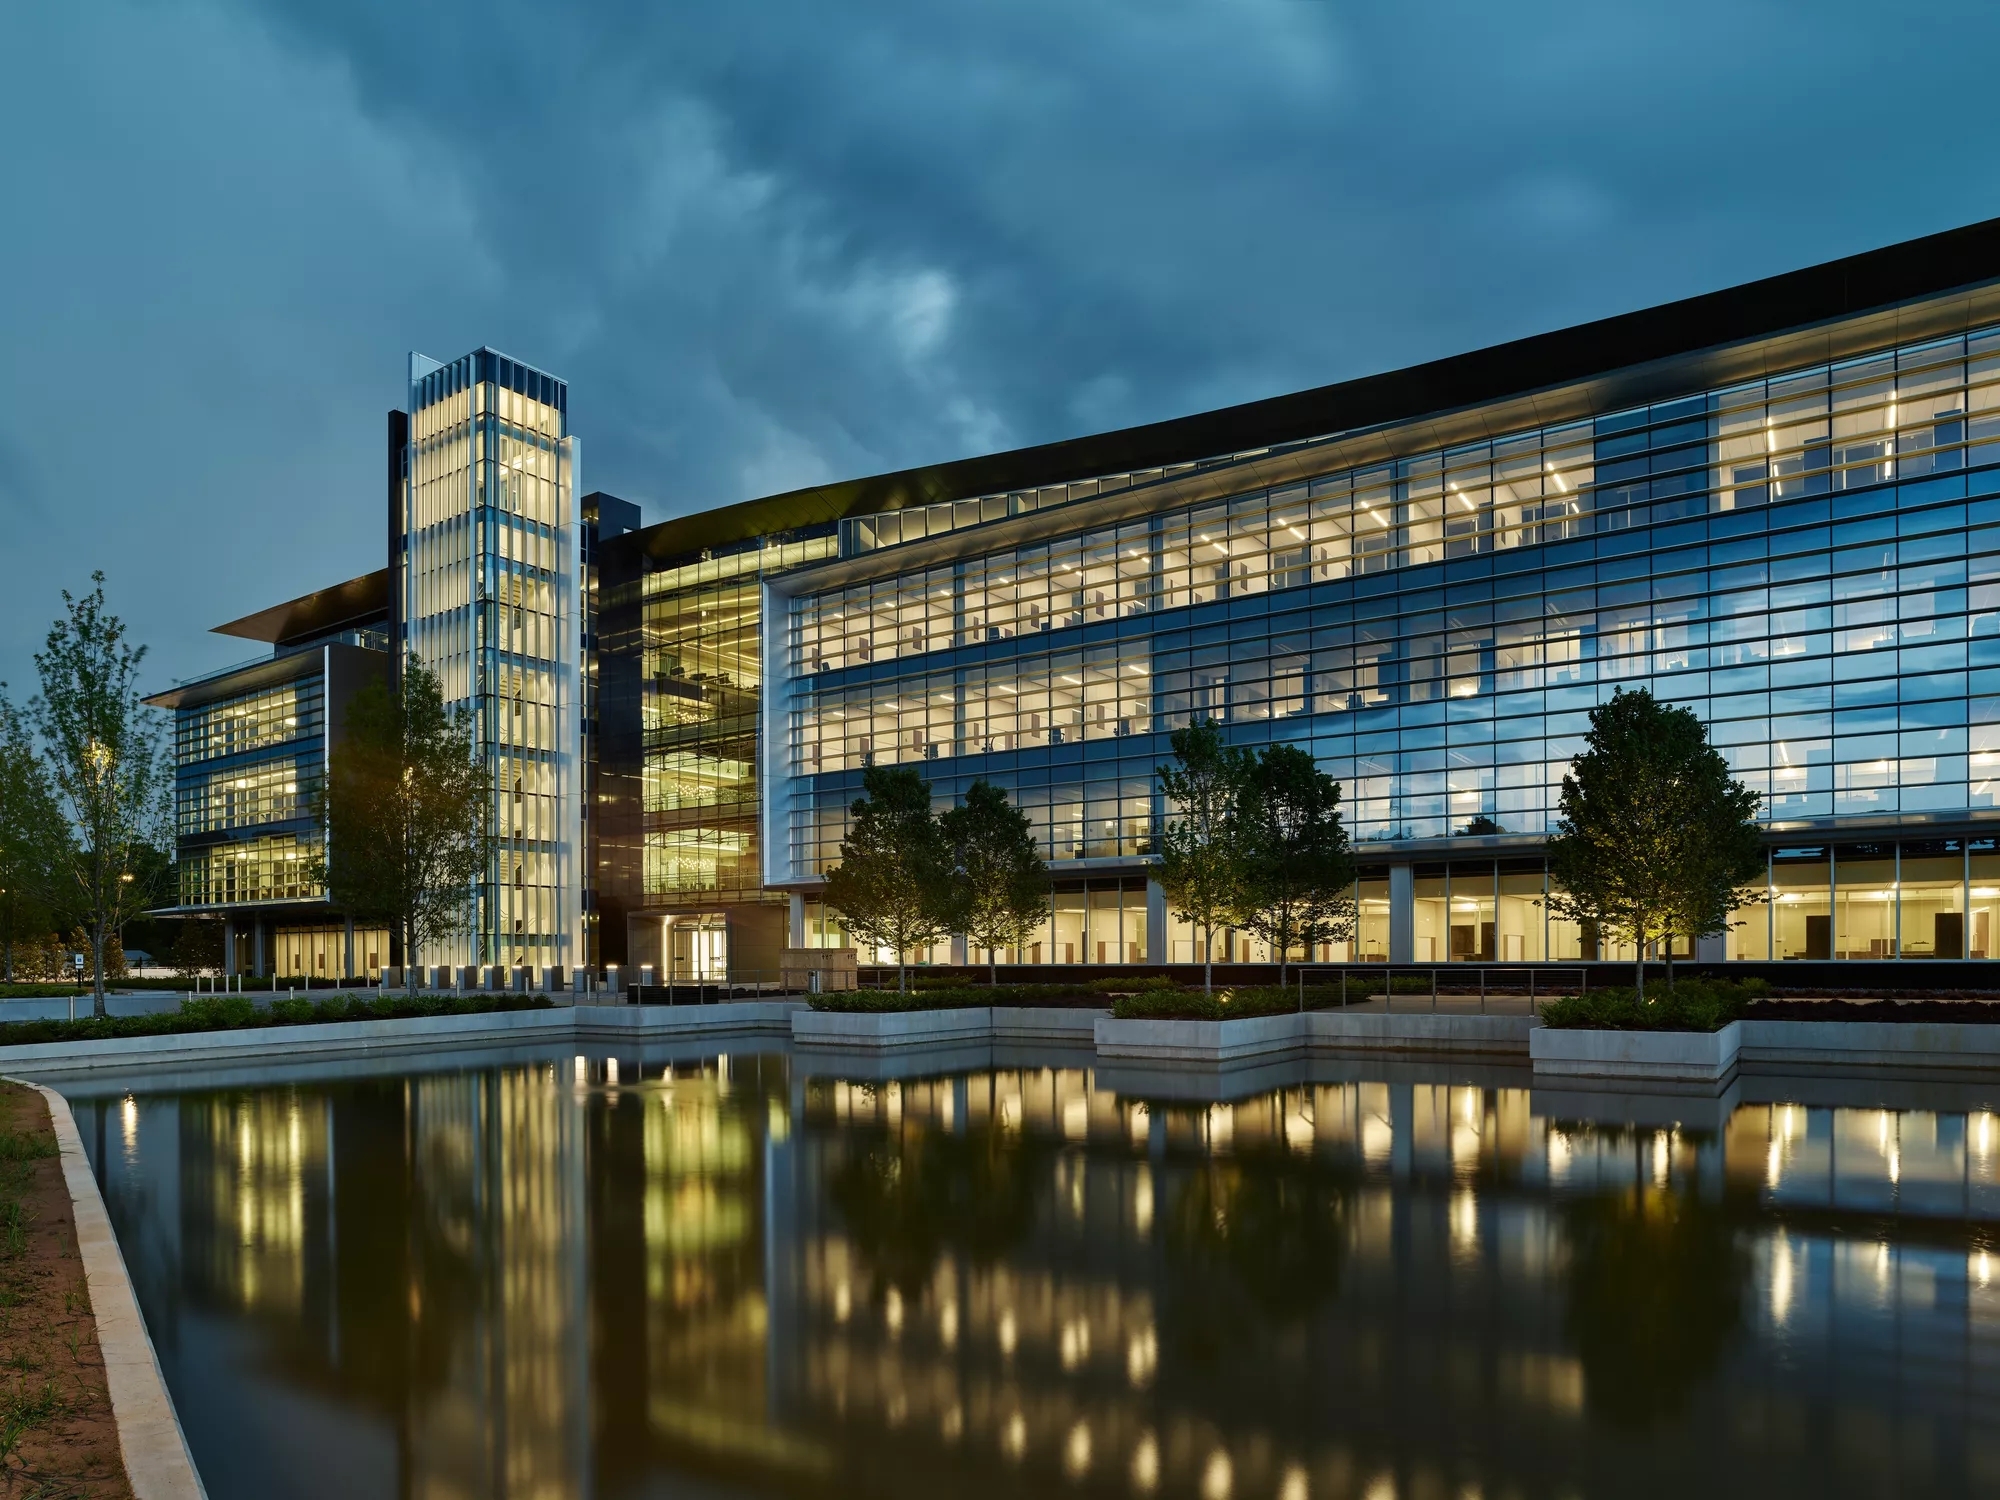 Bank OZK Headquarters at night with many lights lit up, reflecting off the pond in front.